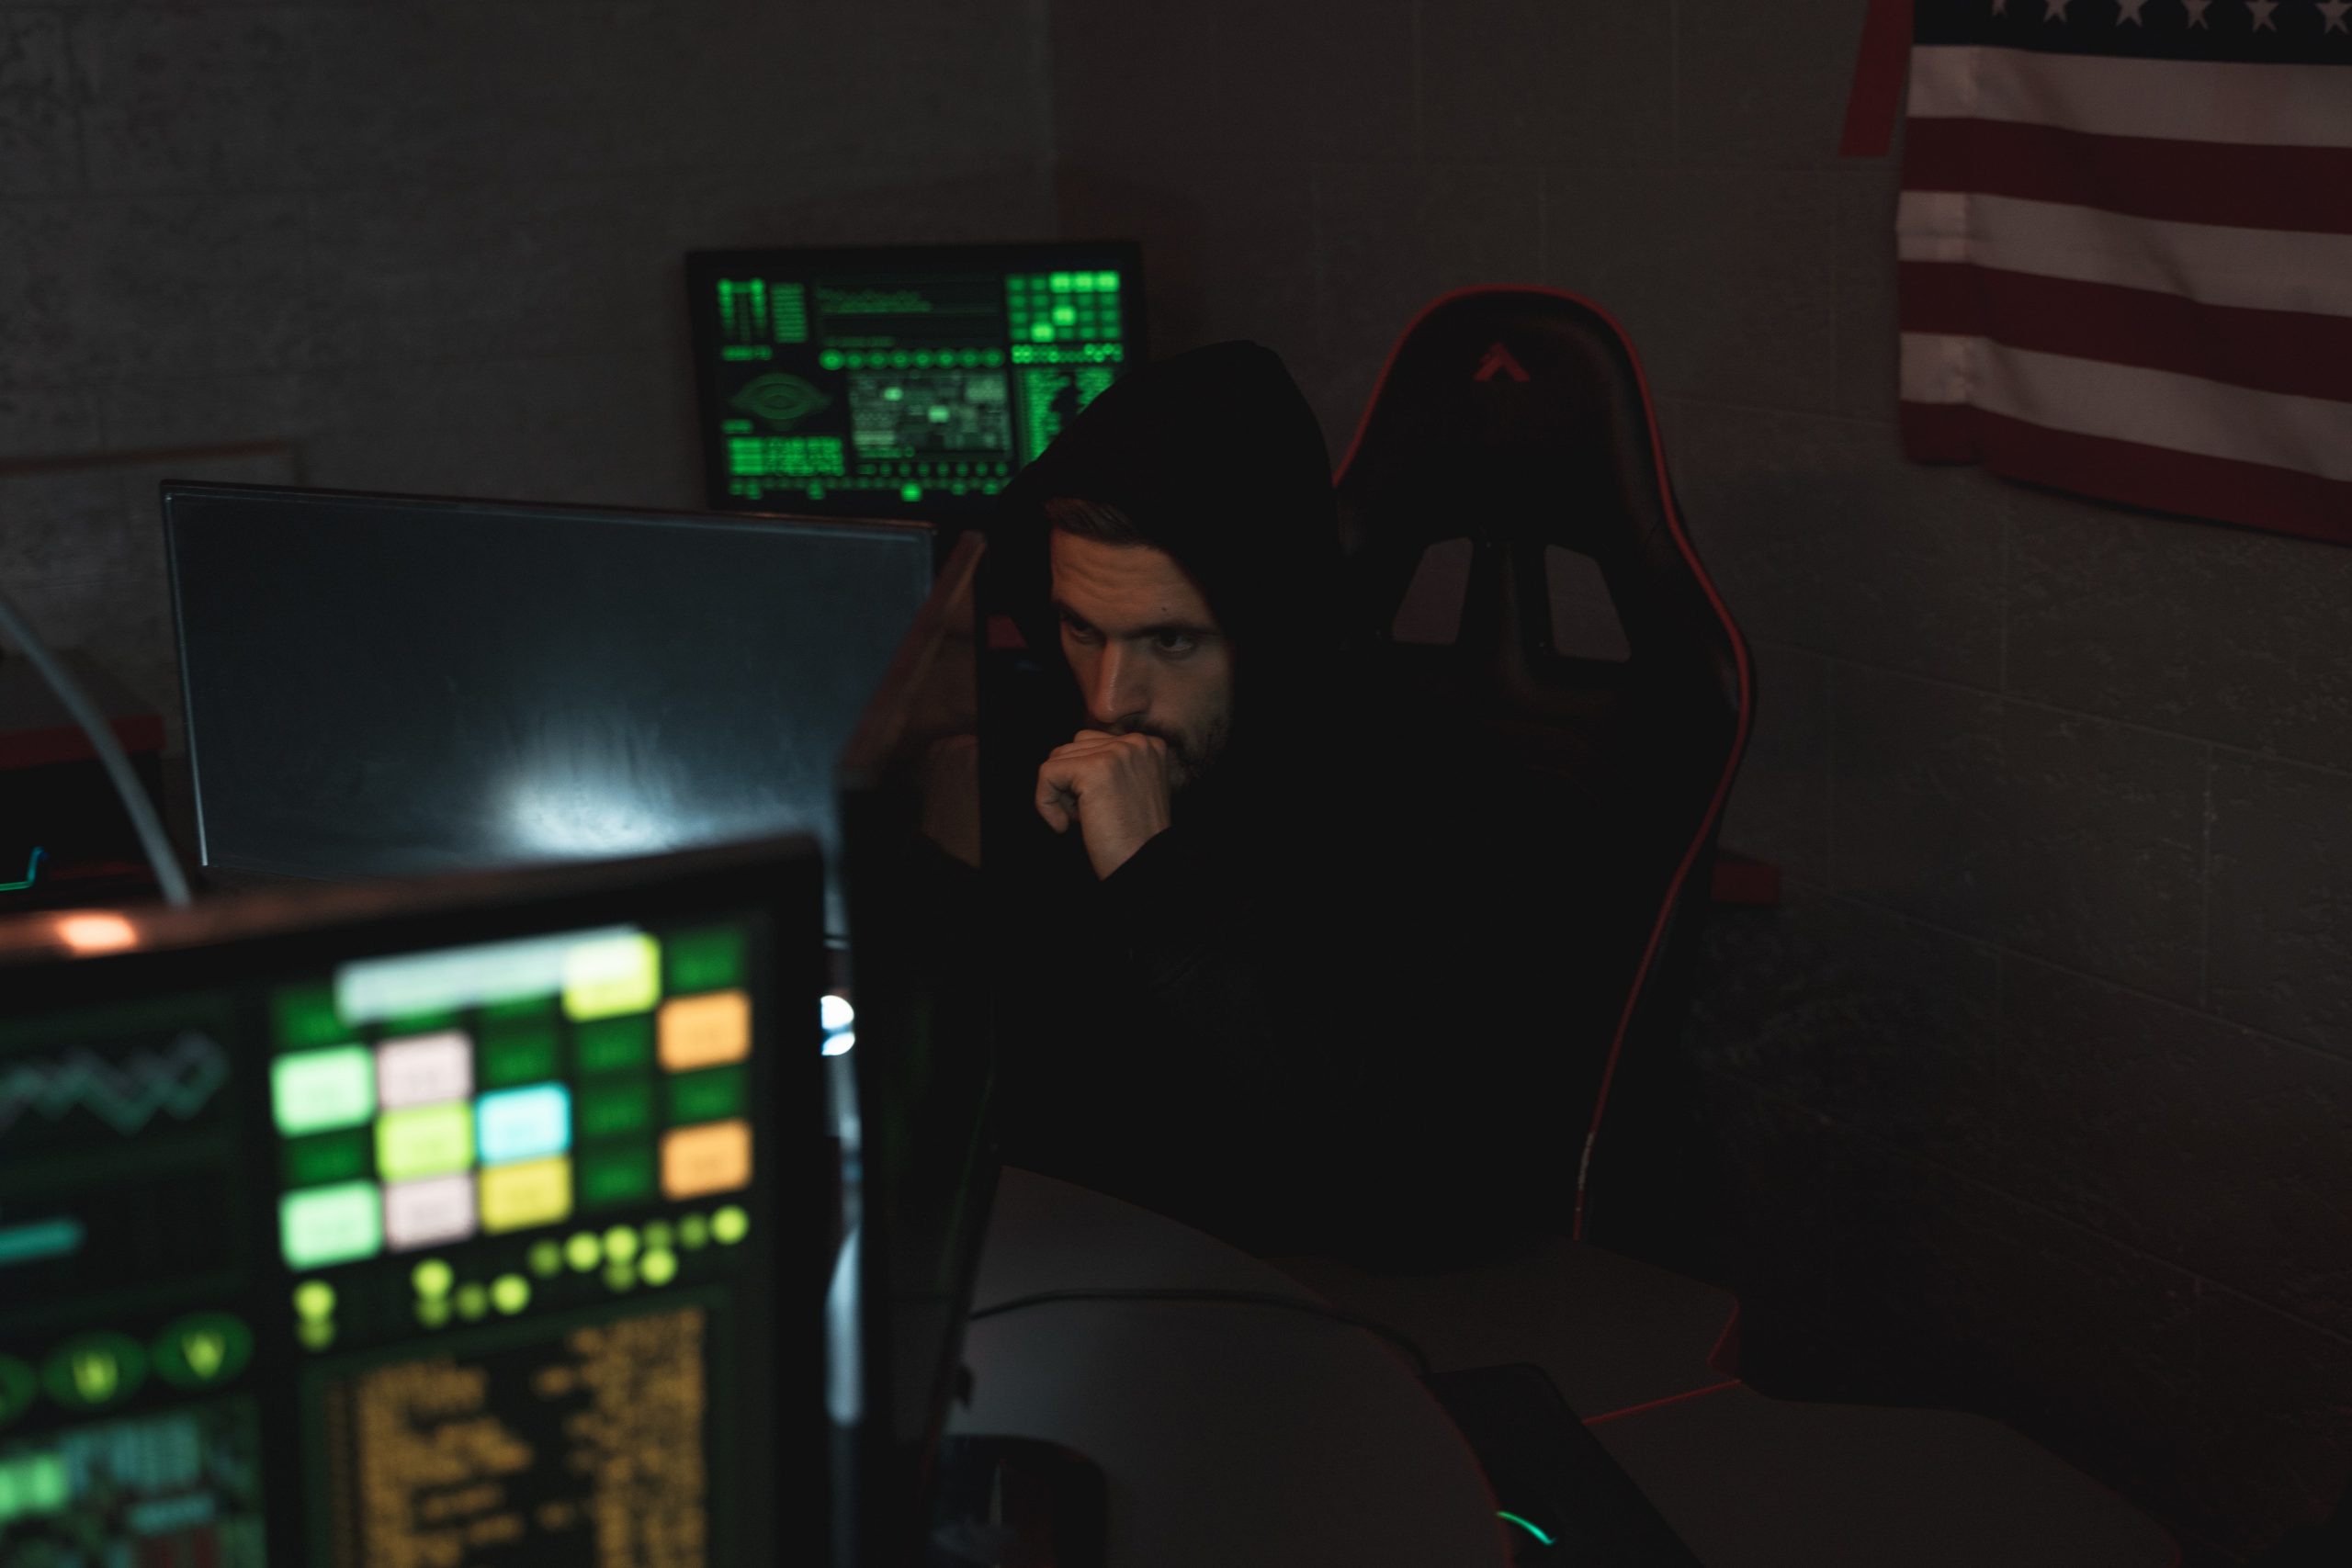 Security Researcher sits in dark room in front of a RGB keyboard surrounded by monitors